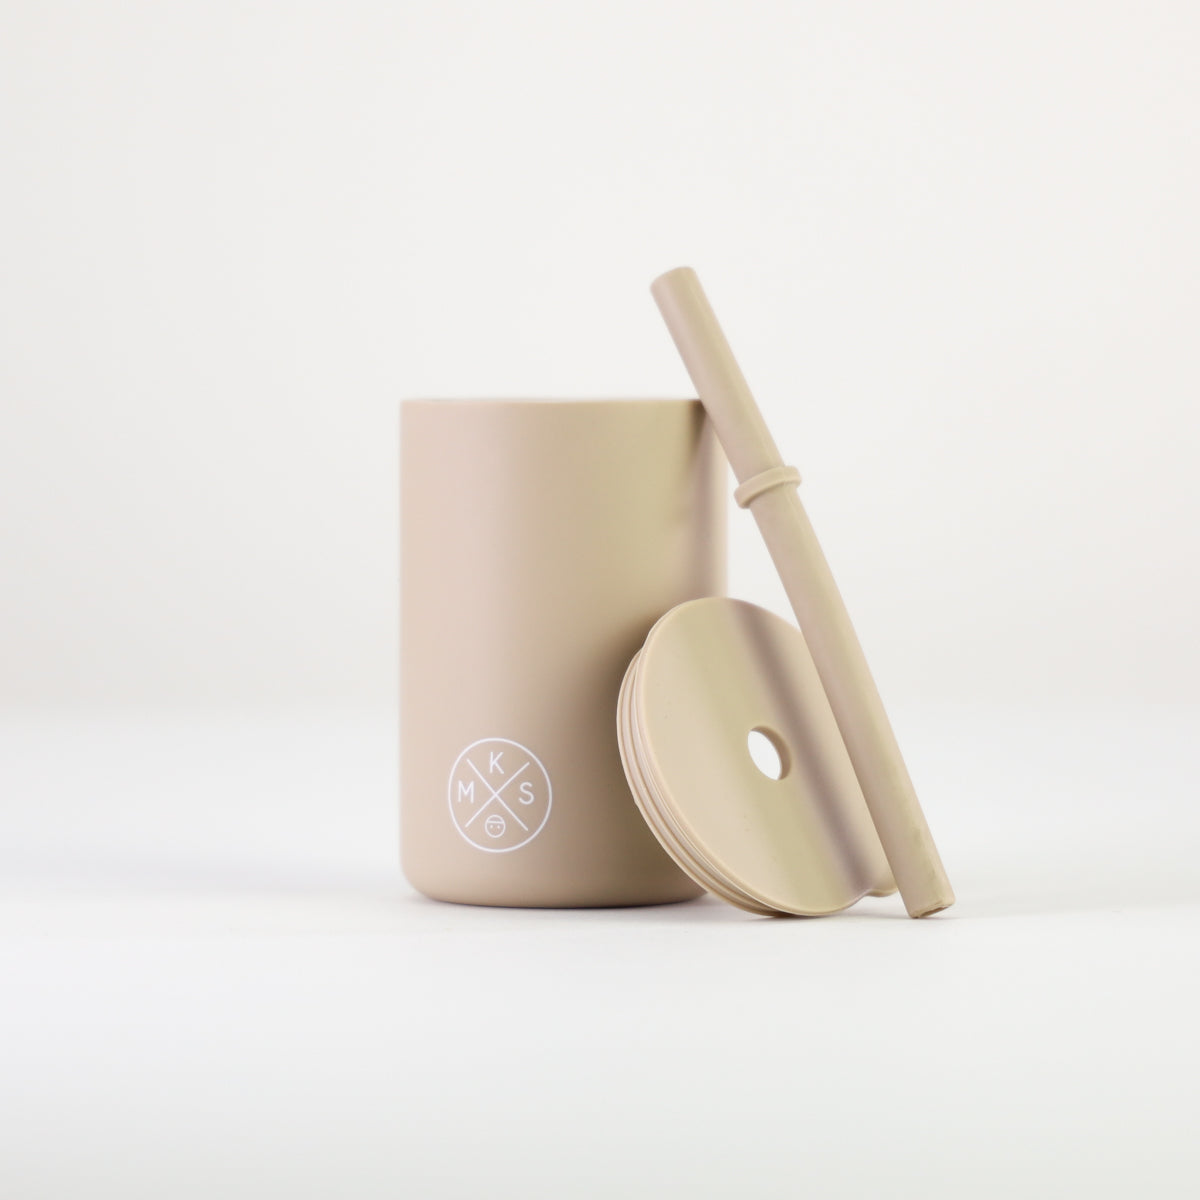 Drinking cup with straw - Beige